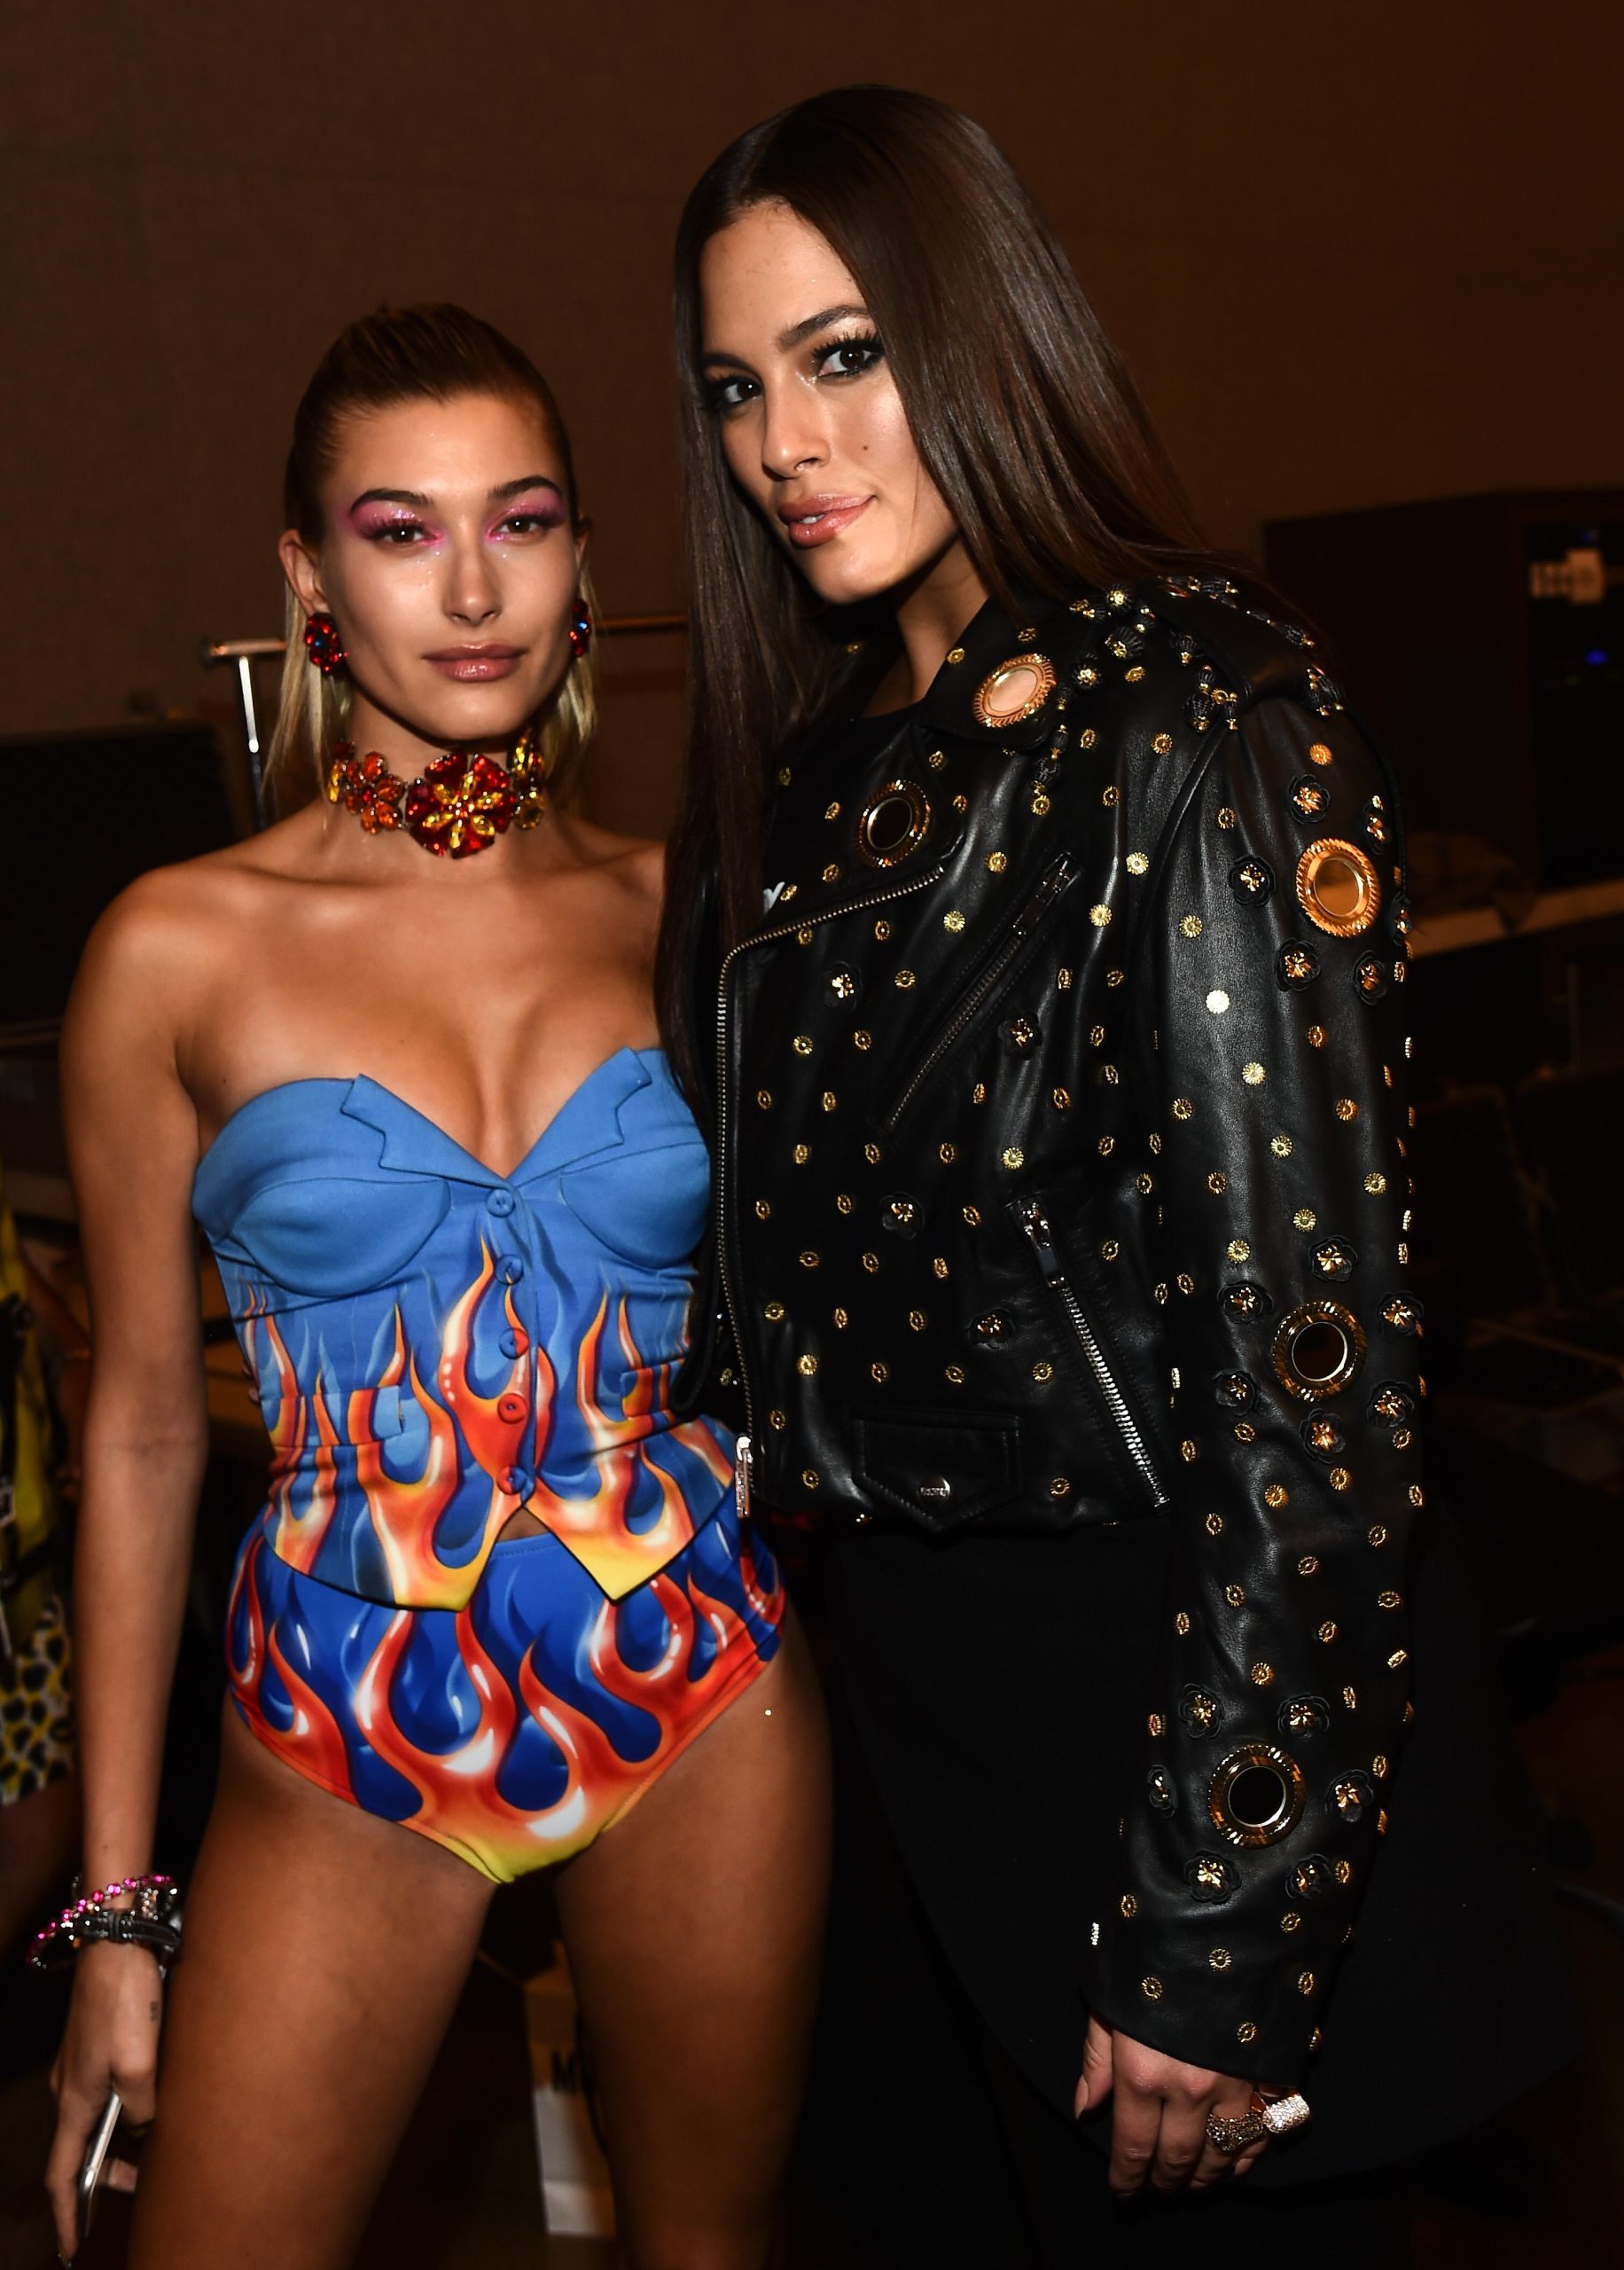 She had a catch up with fellow model Ashley Graham off the runway